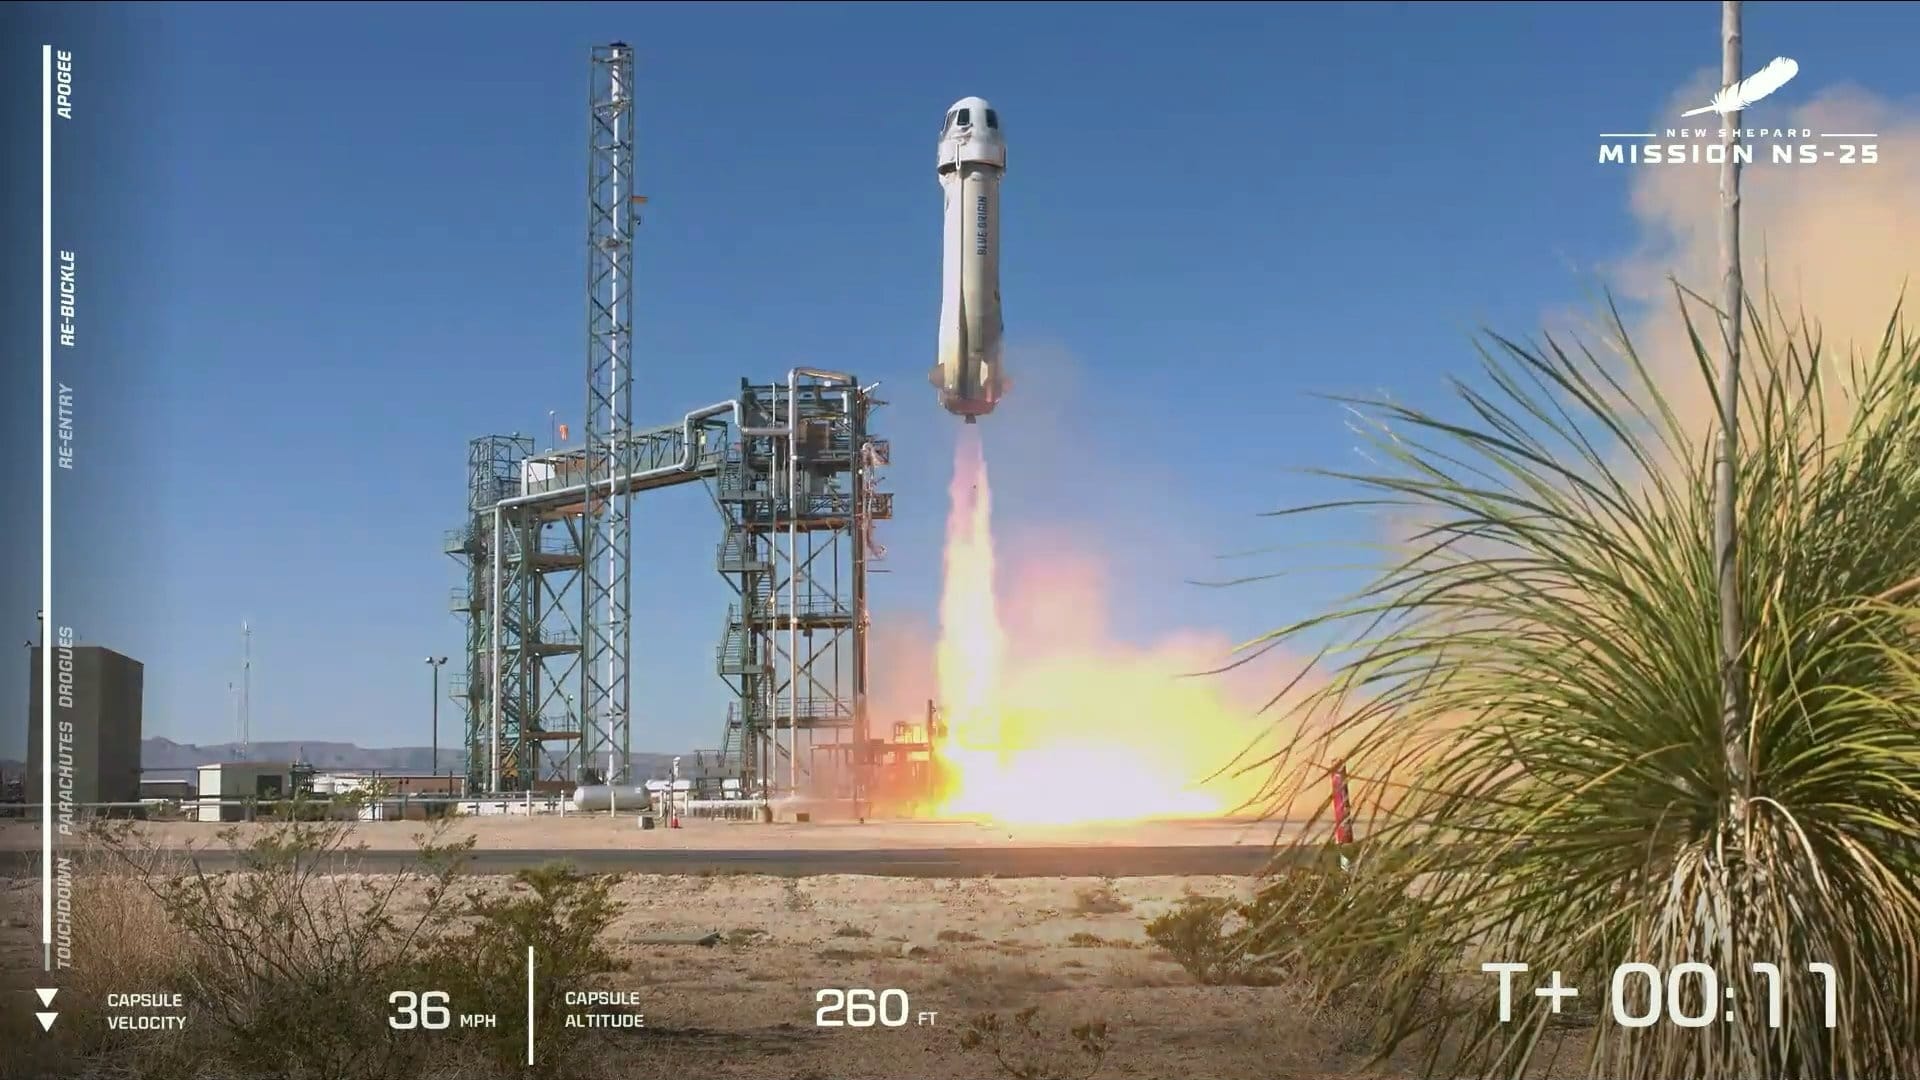 New Shepard lifting off for the NS-25 mission. ©Blue Origin